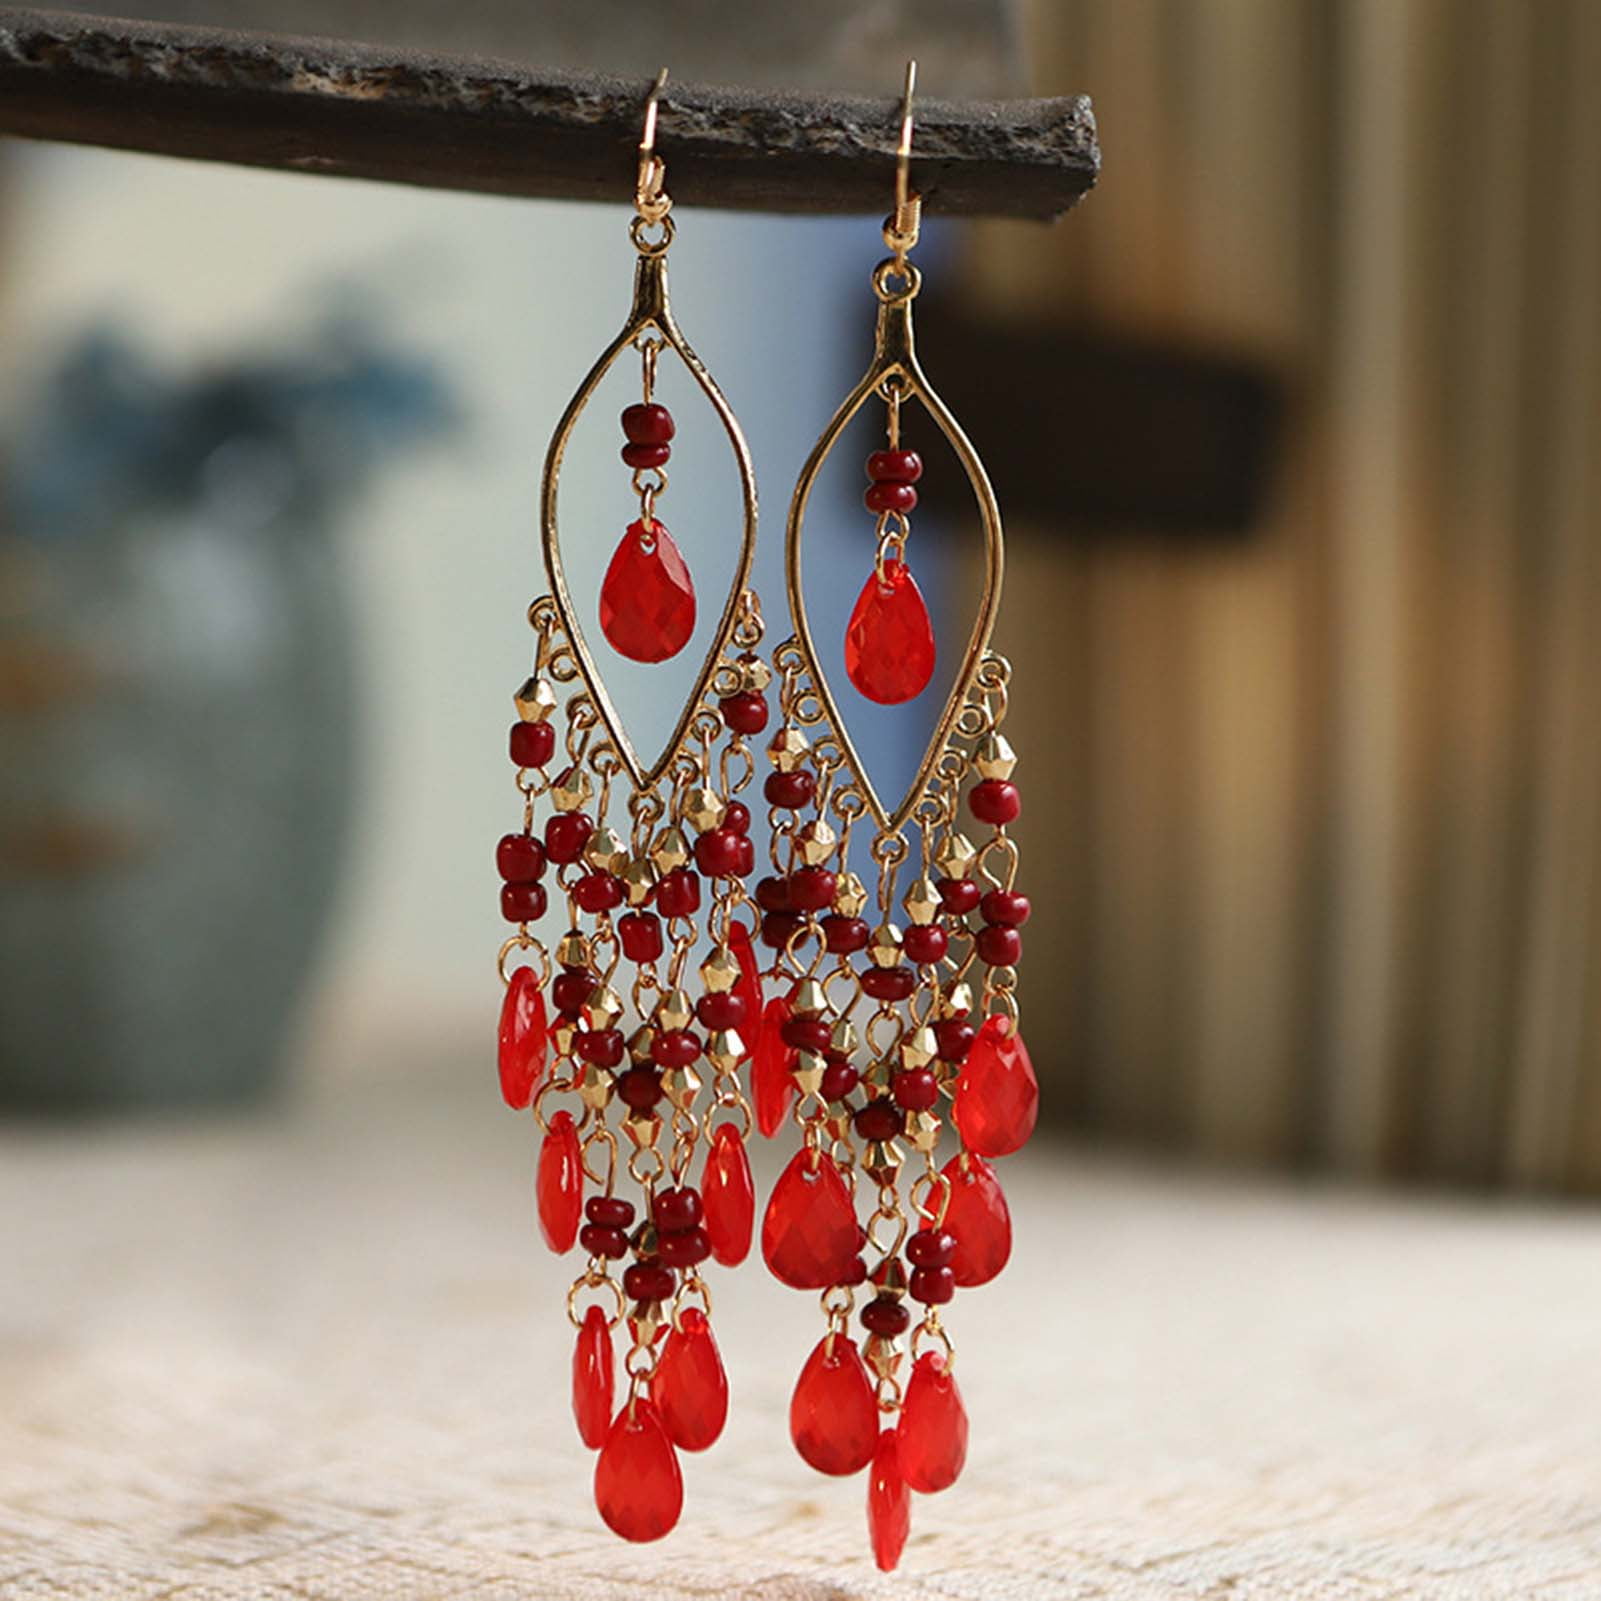 Modern Bohemian Jewelry and Accessories Dark Silver Hollow-Cage Lace Sphere Hook Earrings Minimalistic Jewelry